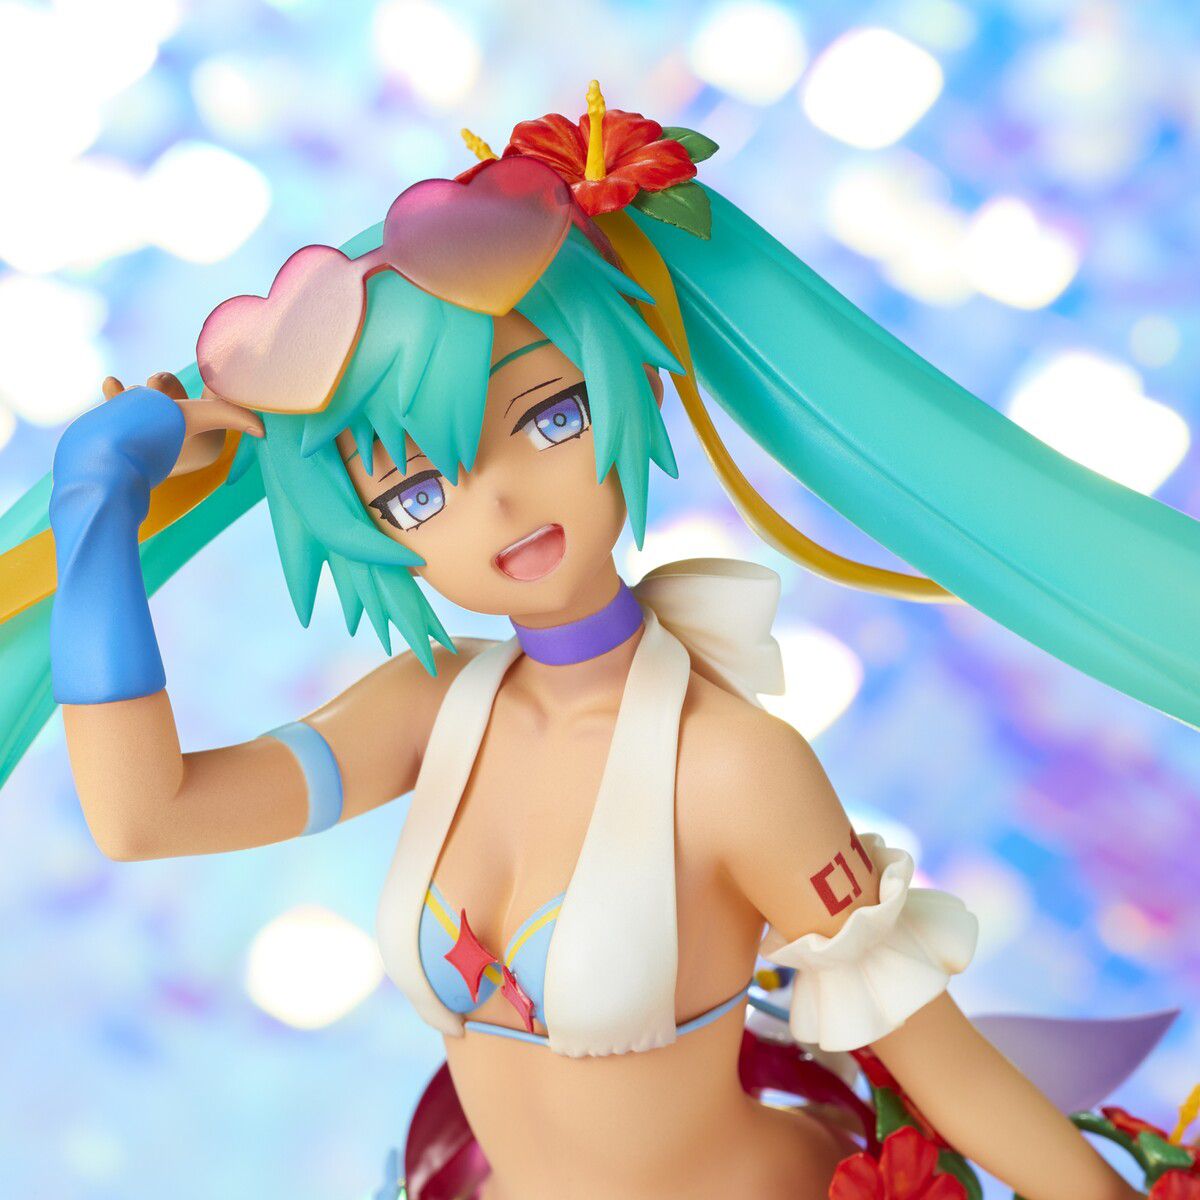 [Hatsune Miku] erotic tanned and erotic figure of a very nice swimsuit costume in Jito eyes! 2